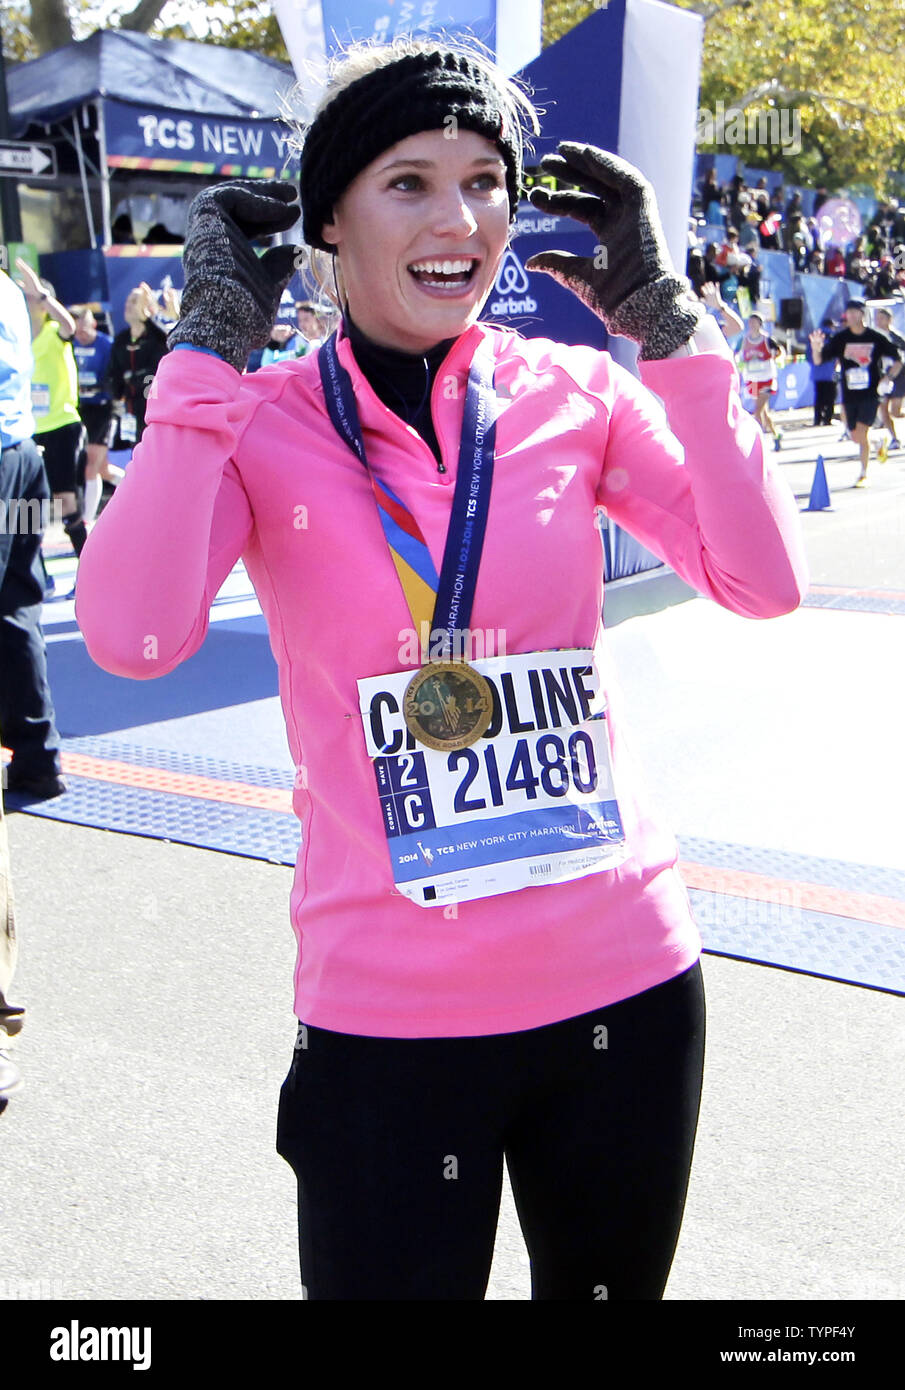 Tennis star Caroline Wozniacki reacts at the finish line after completing  the NYRR TCS New York City Marathon in New York City on November 2, 2014.  50,000 runners from the Big Apple